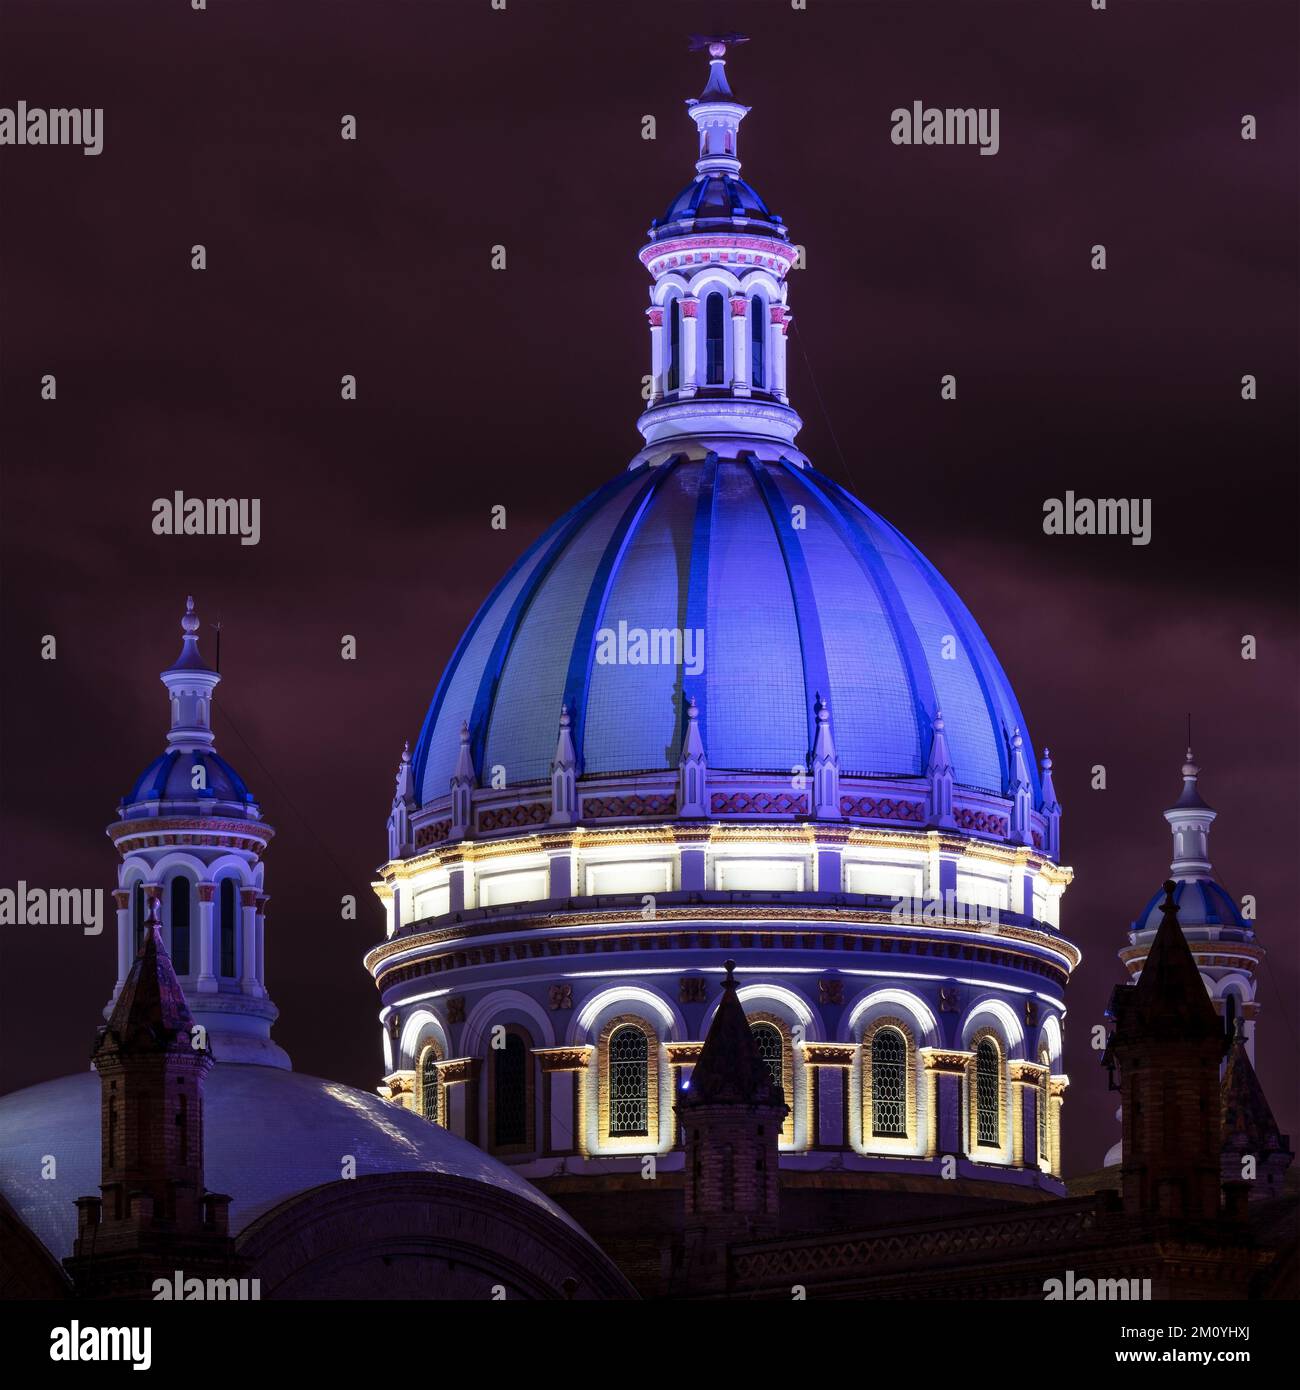 Dome tower of the New Cathedral at night, Cuenca, Ecuador. Stock Photo